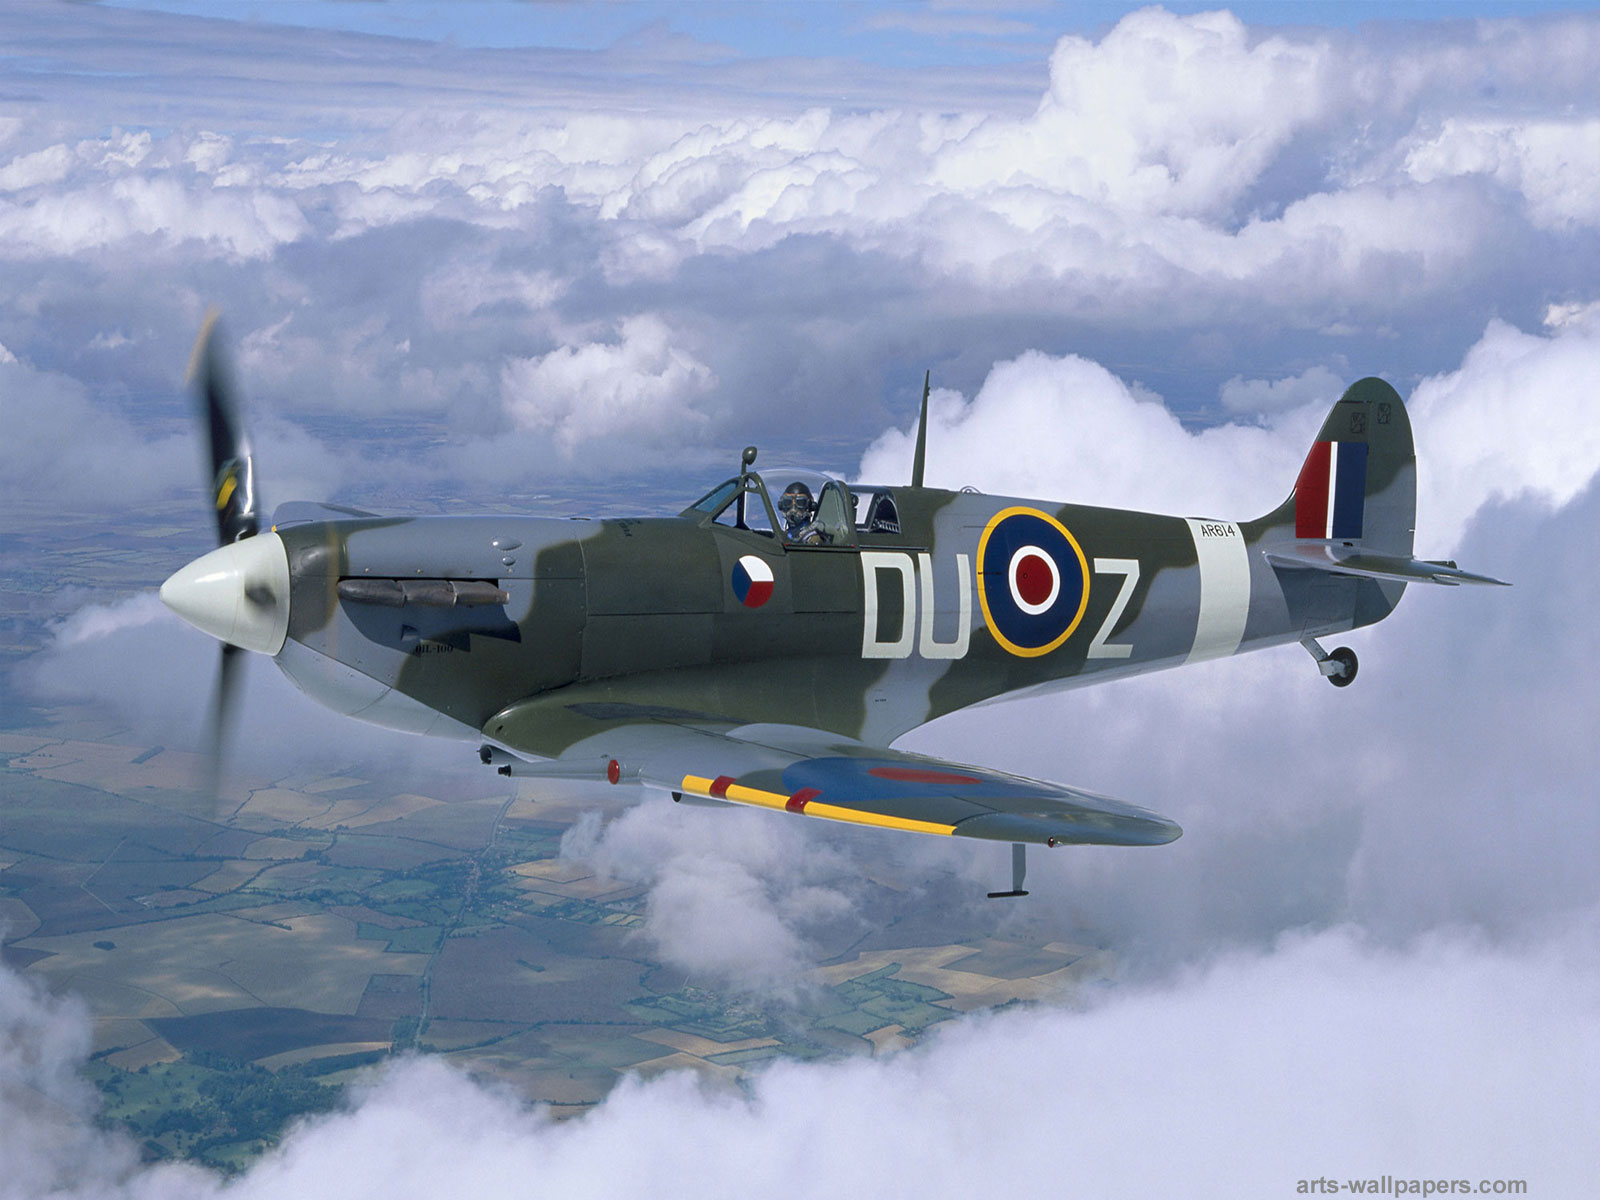 To Delete This Spitfire Wallpaper Image From Our Index